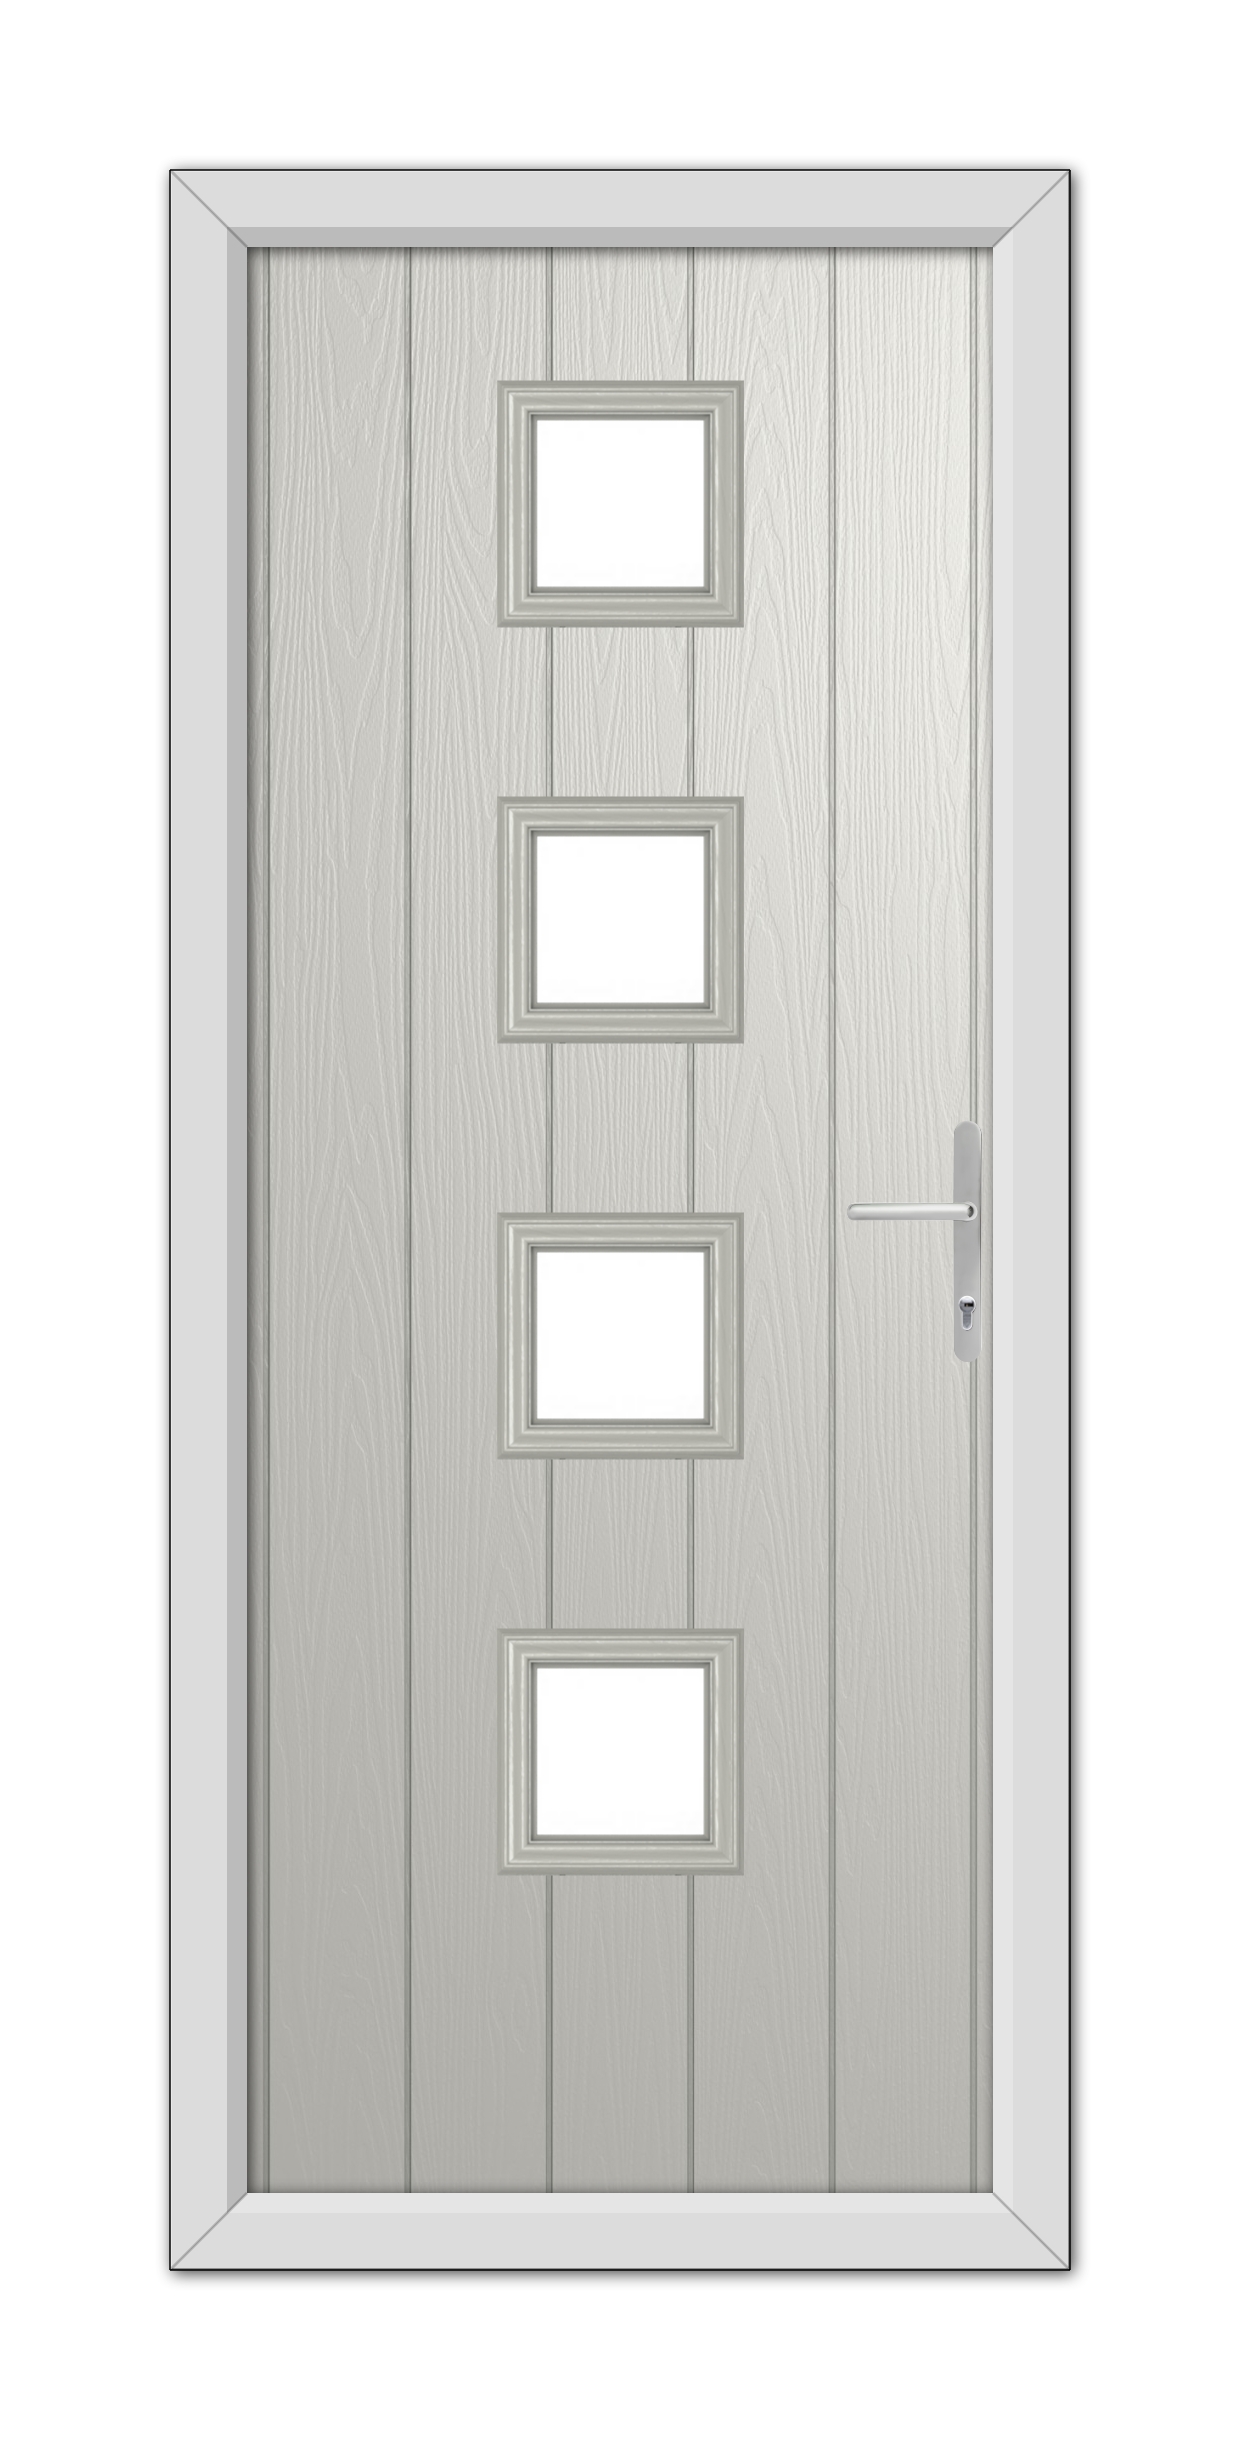 A modern Agate Grey Hamilton Composite Door 48mm Timber Core with four rectangular glass panels, a silver handle, and a frame, viewed from the front.